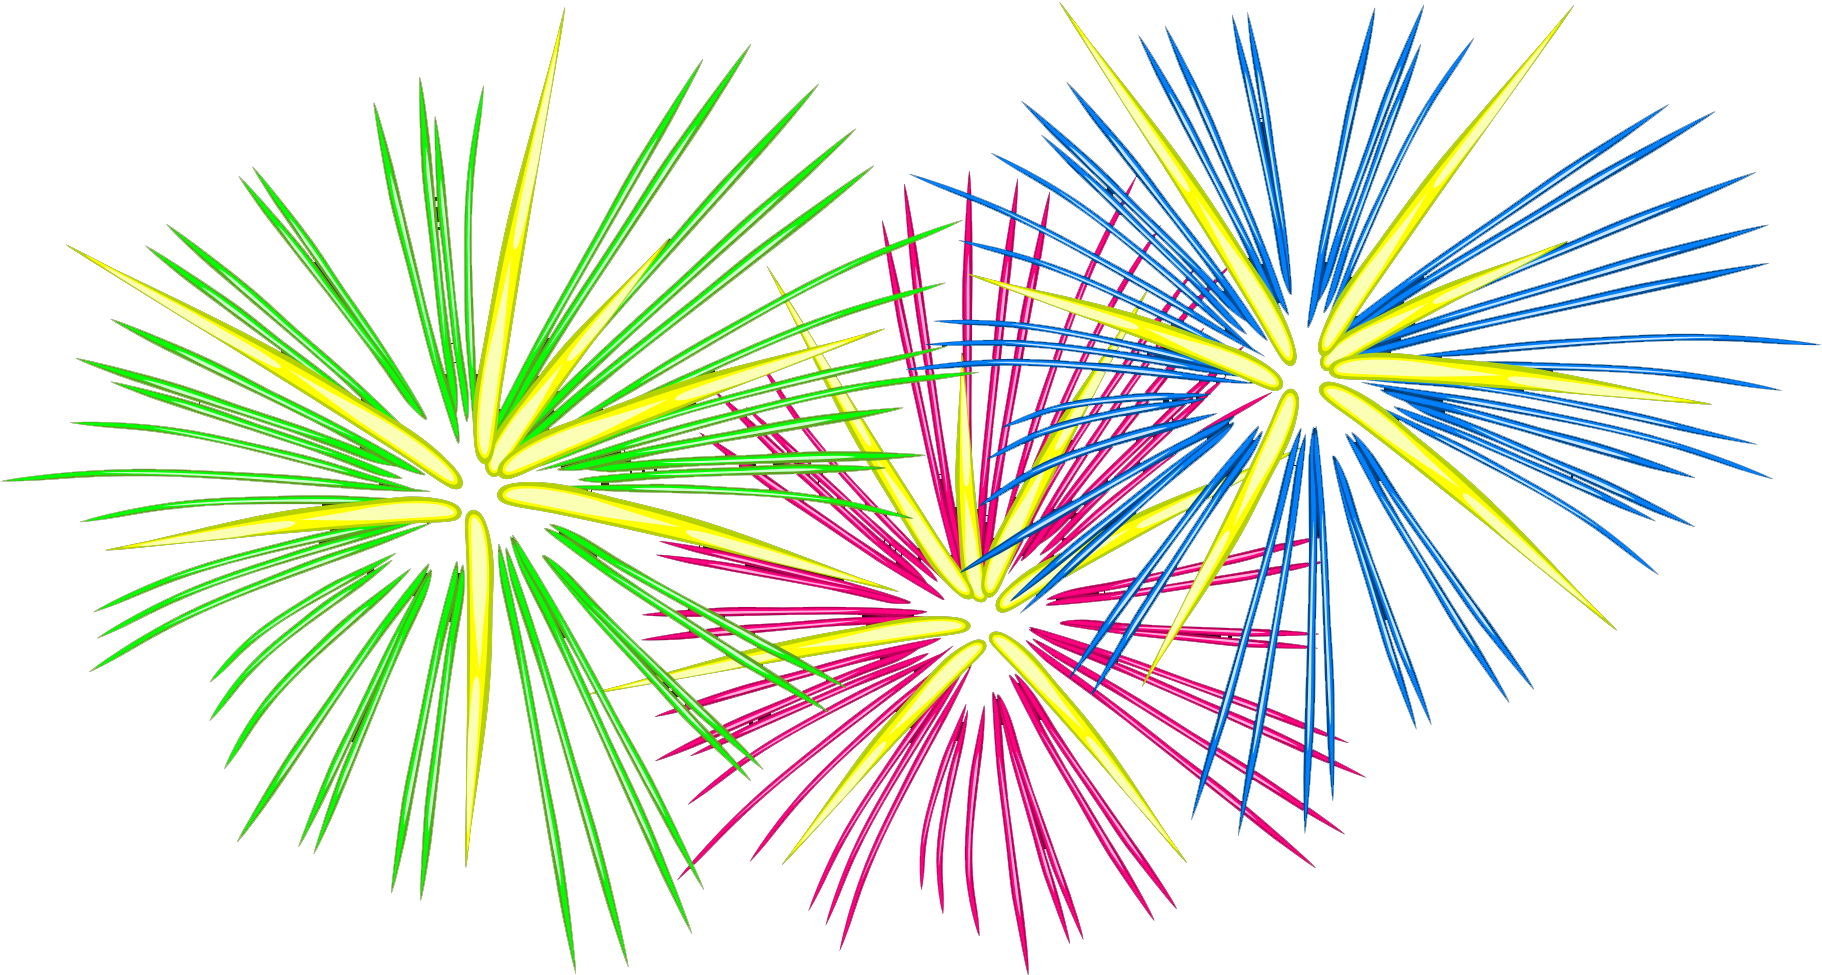 A Group Of Colorful Fireworks